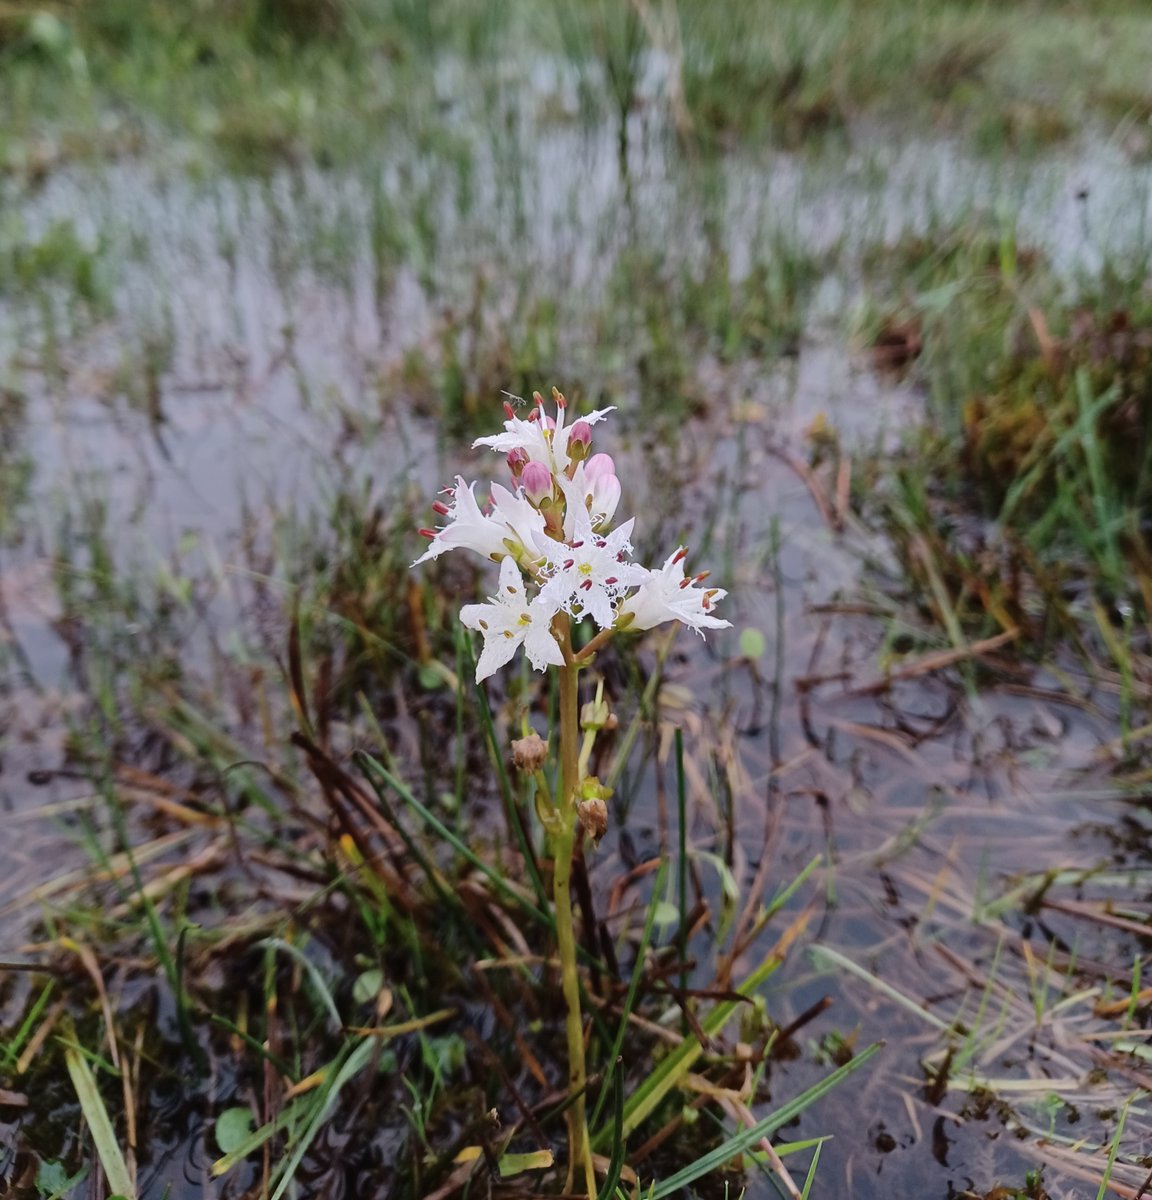 Defiant flowering bog bean, like a candle in the wind over Cors Bodeilio last night.
Any other pictures of these beauties flowering so late into the season?
#WalesPeatlandAction #HighNatureLowCarbon
#PeatlandMatters